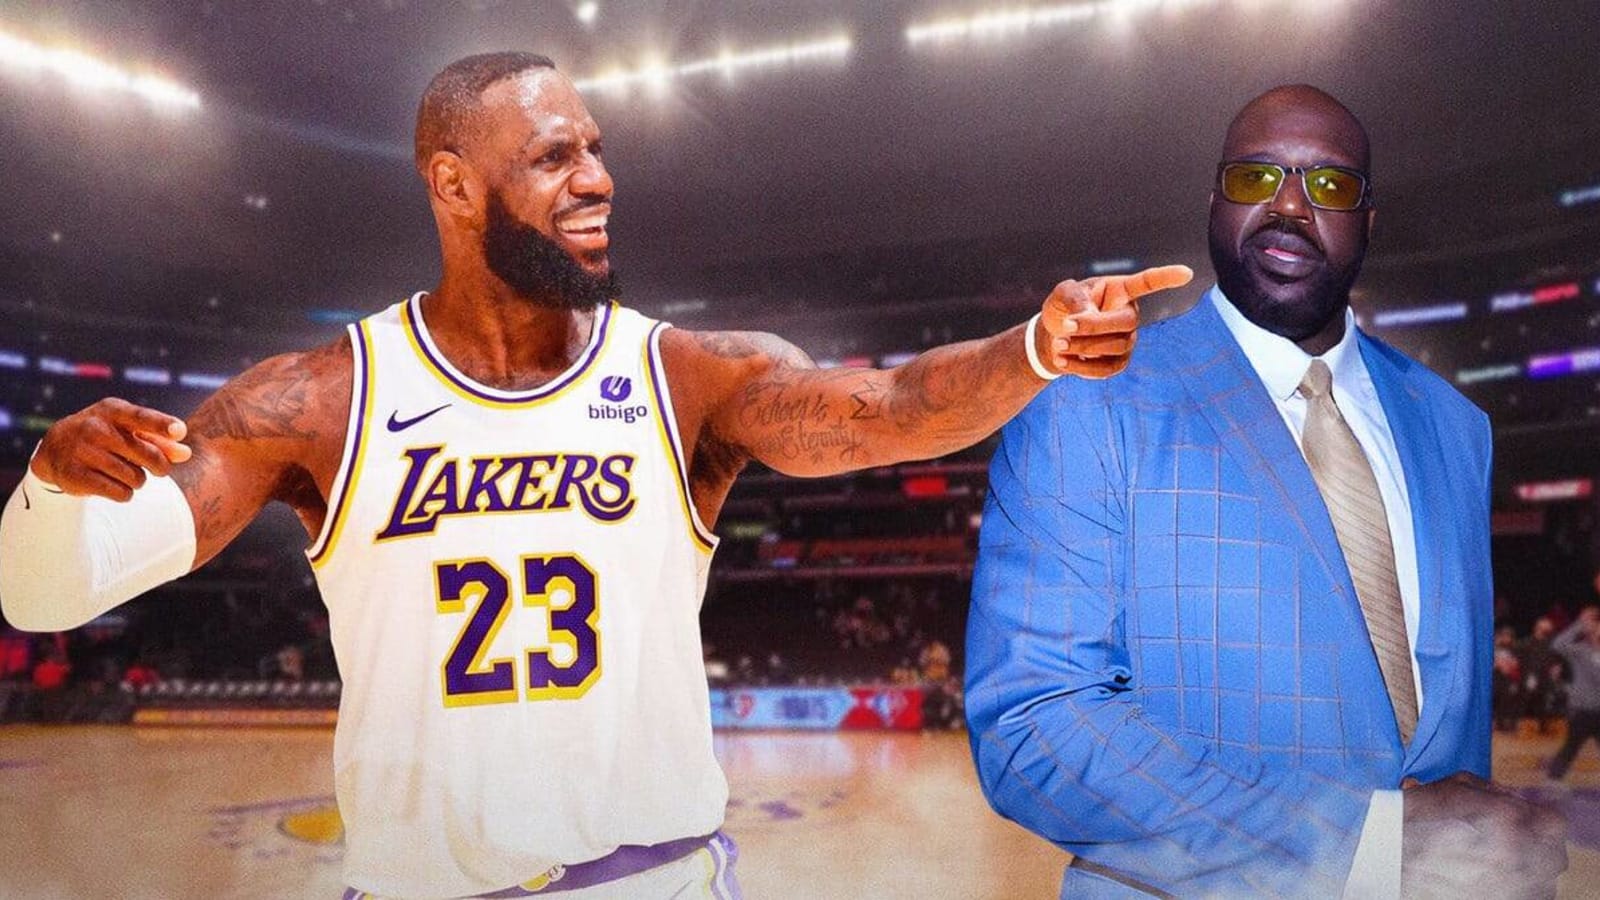 Did LeBron James diss Shaquille O’Neal? Lakers fans puzzled over latest IG post